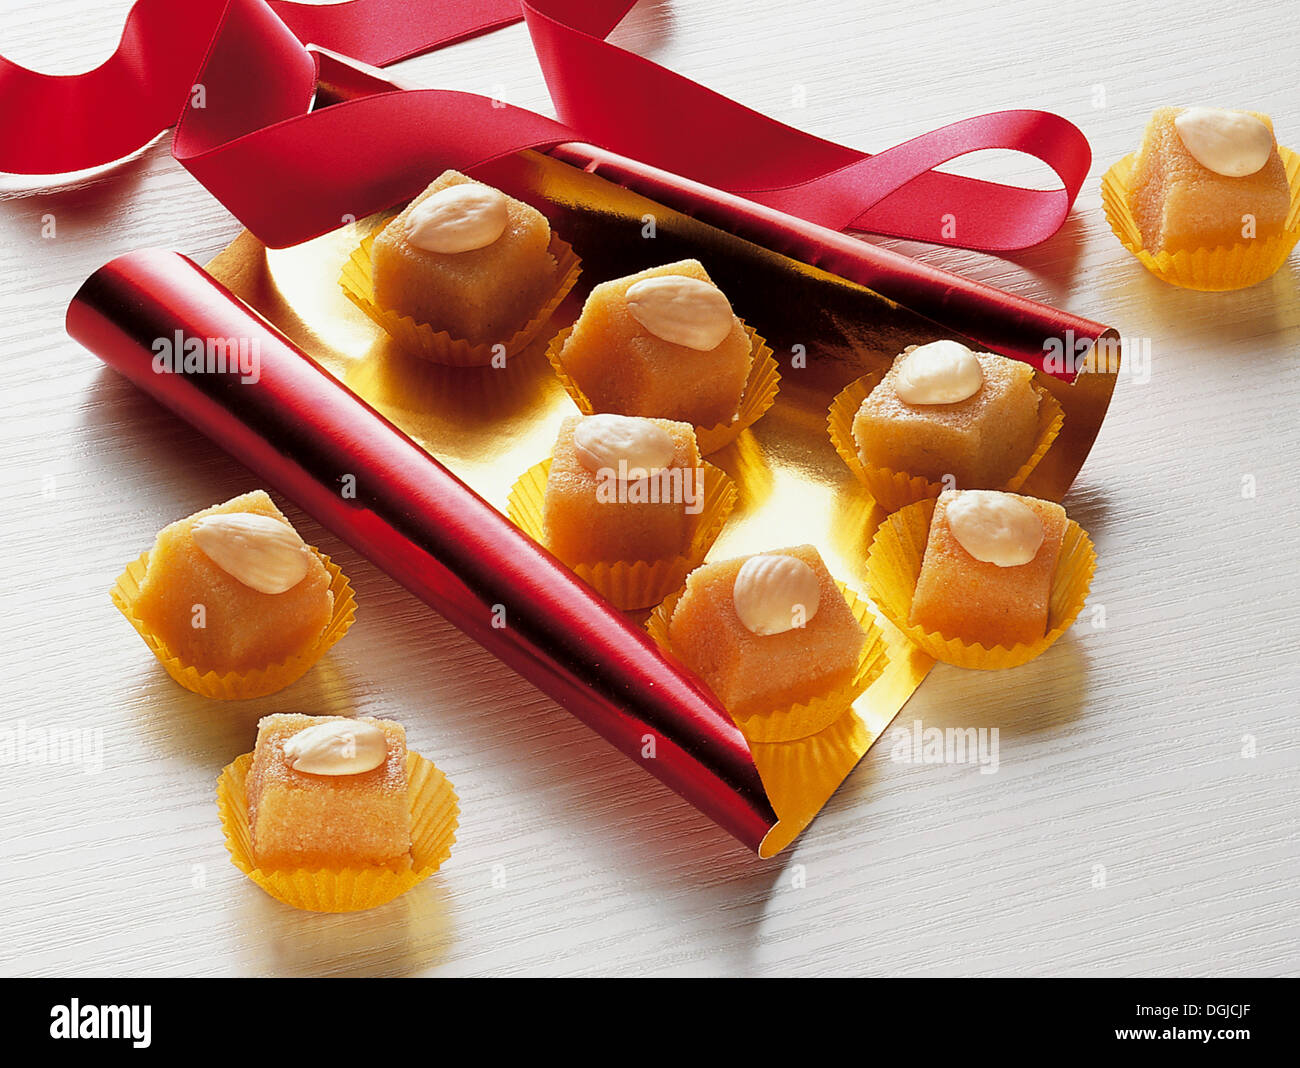 Spicy almond confectionery, Spain. Stock Photo